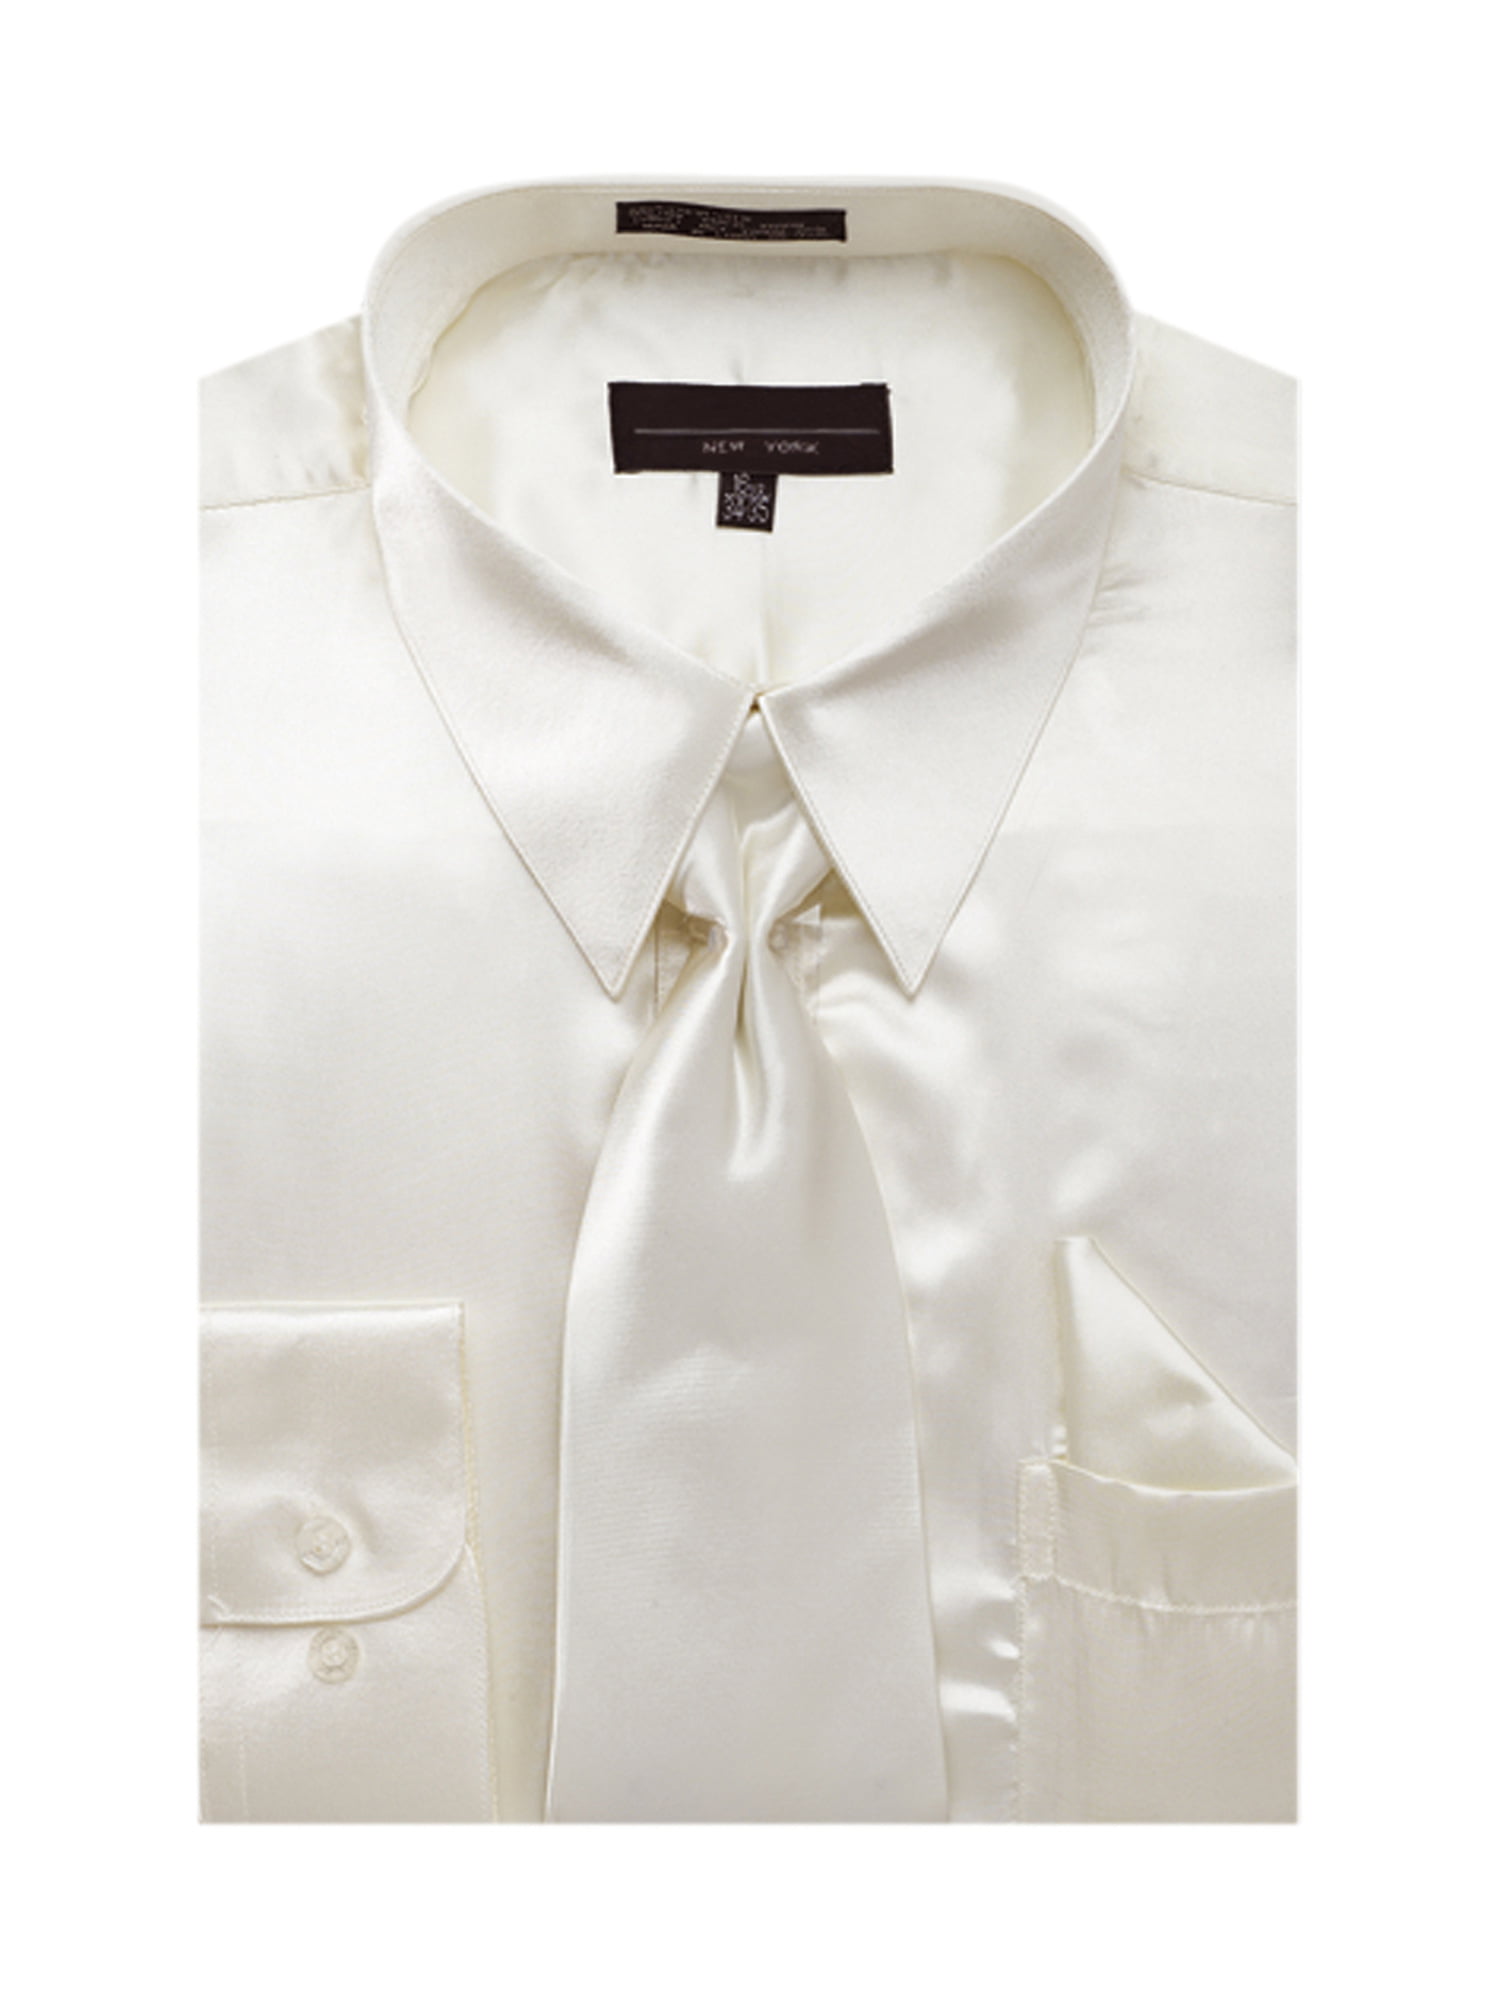 Boys Satin Dress Shirt with Matching Tie and Hanky Set 